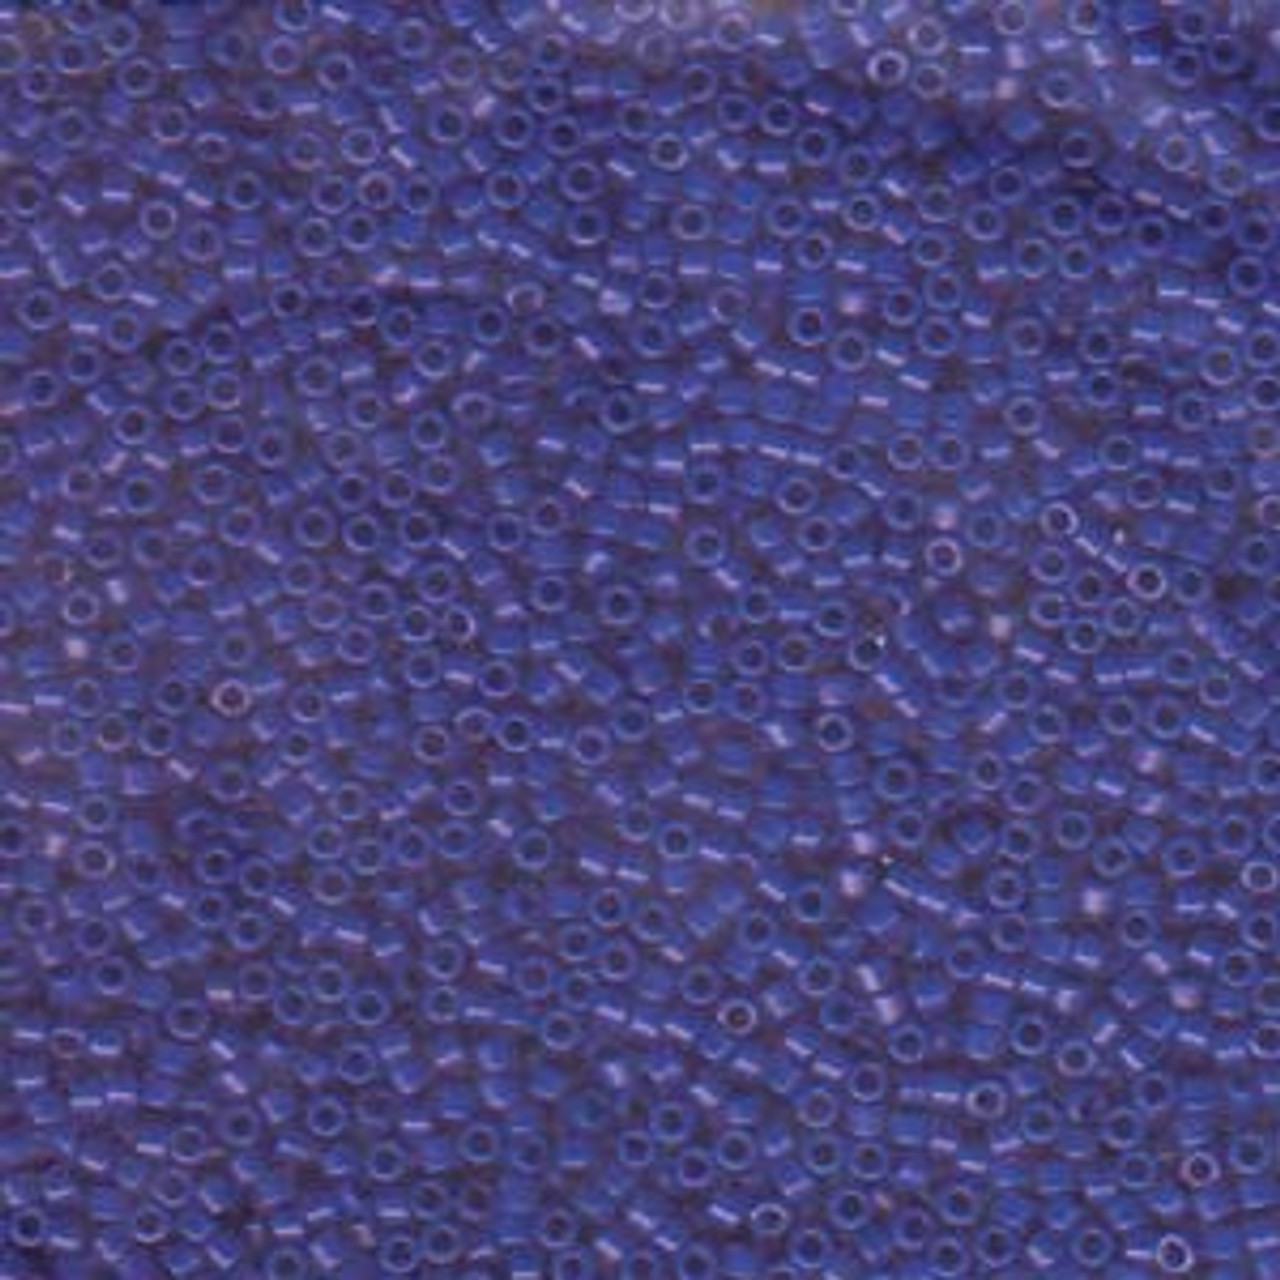 Opaque Dark Blue 11/0 Delica Seed Beads (db726) 7.2 Grams